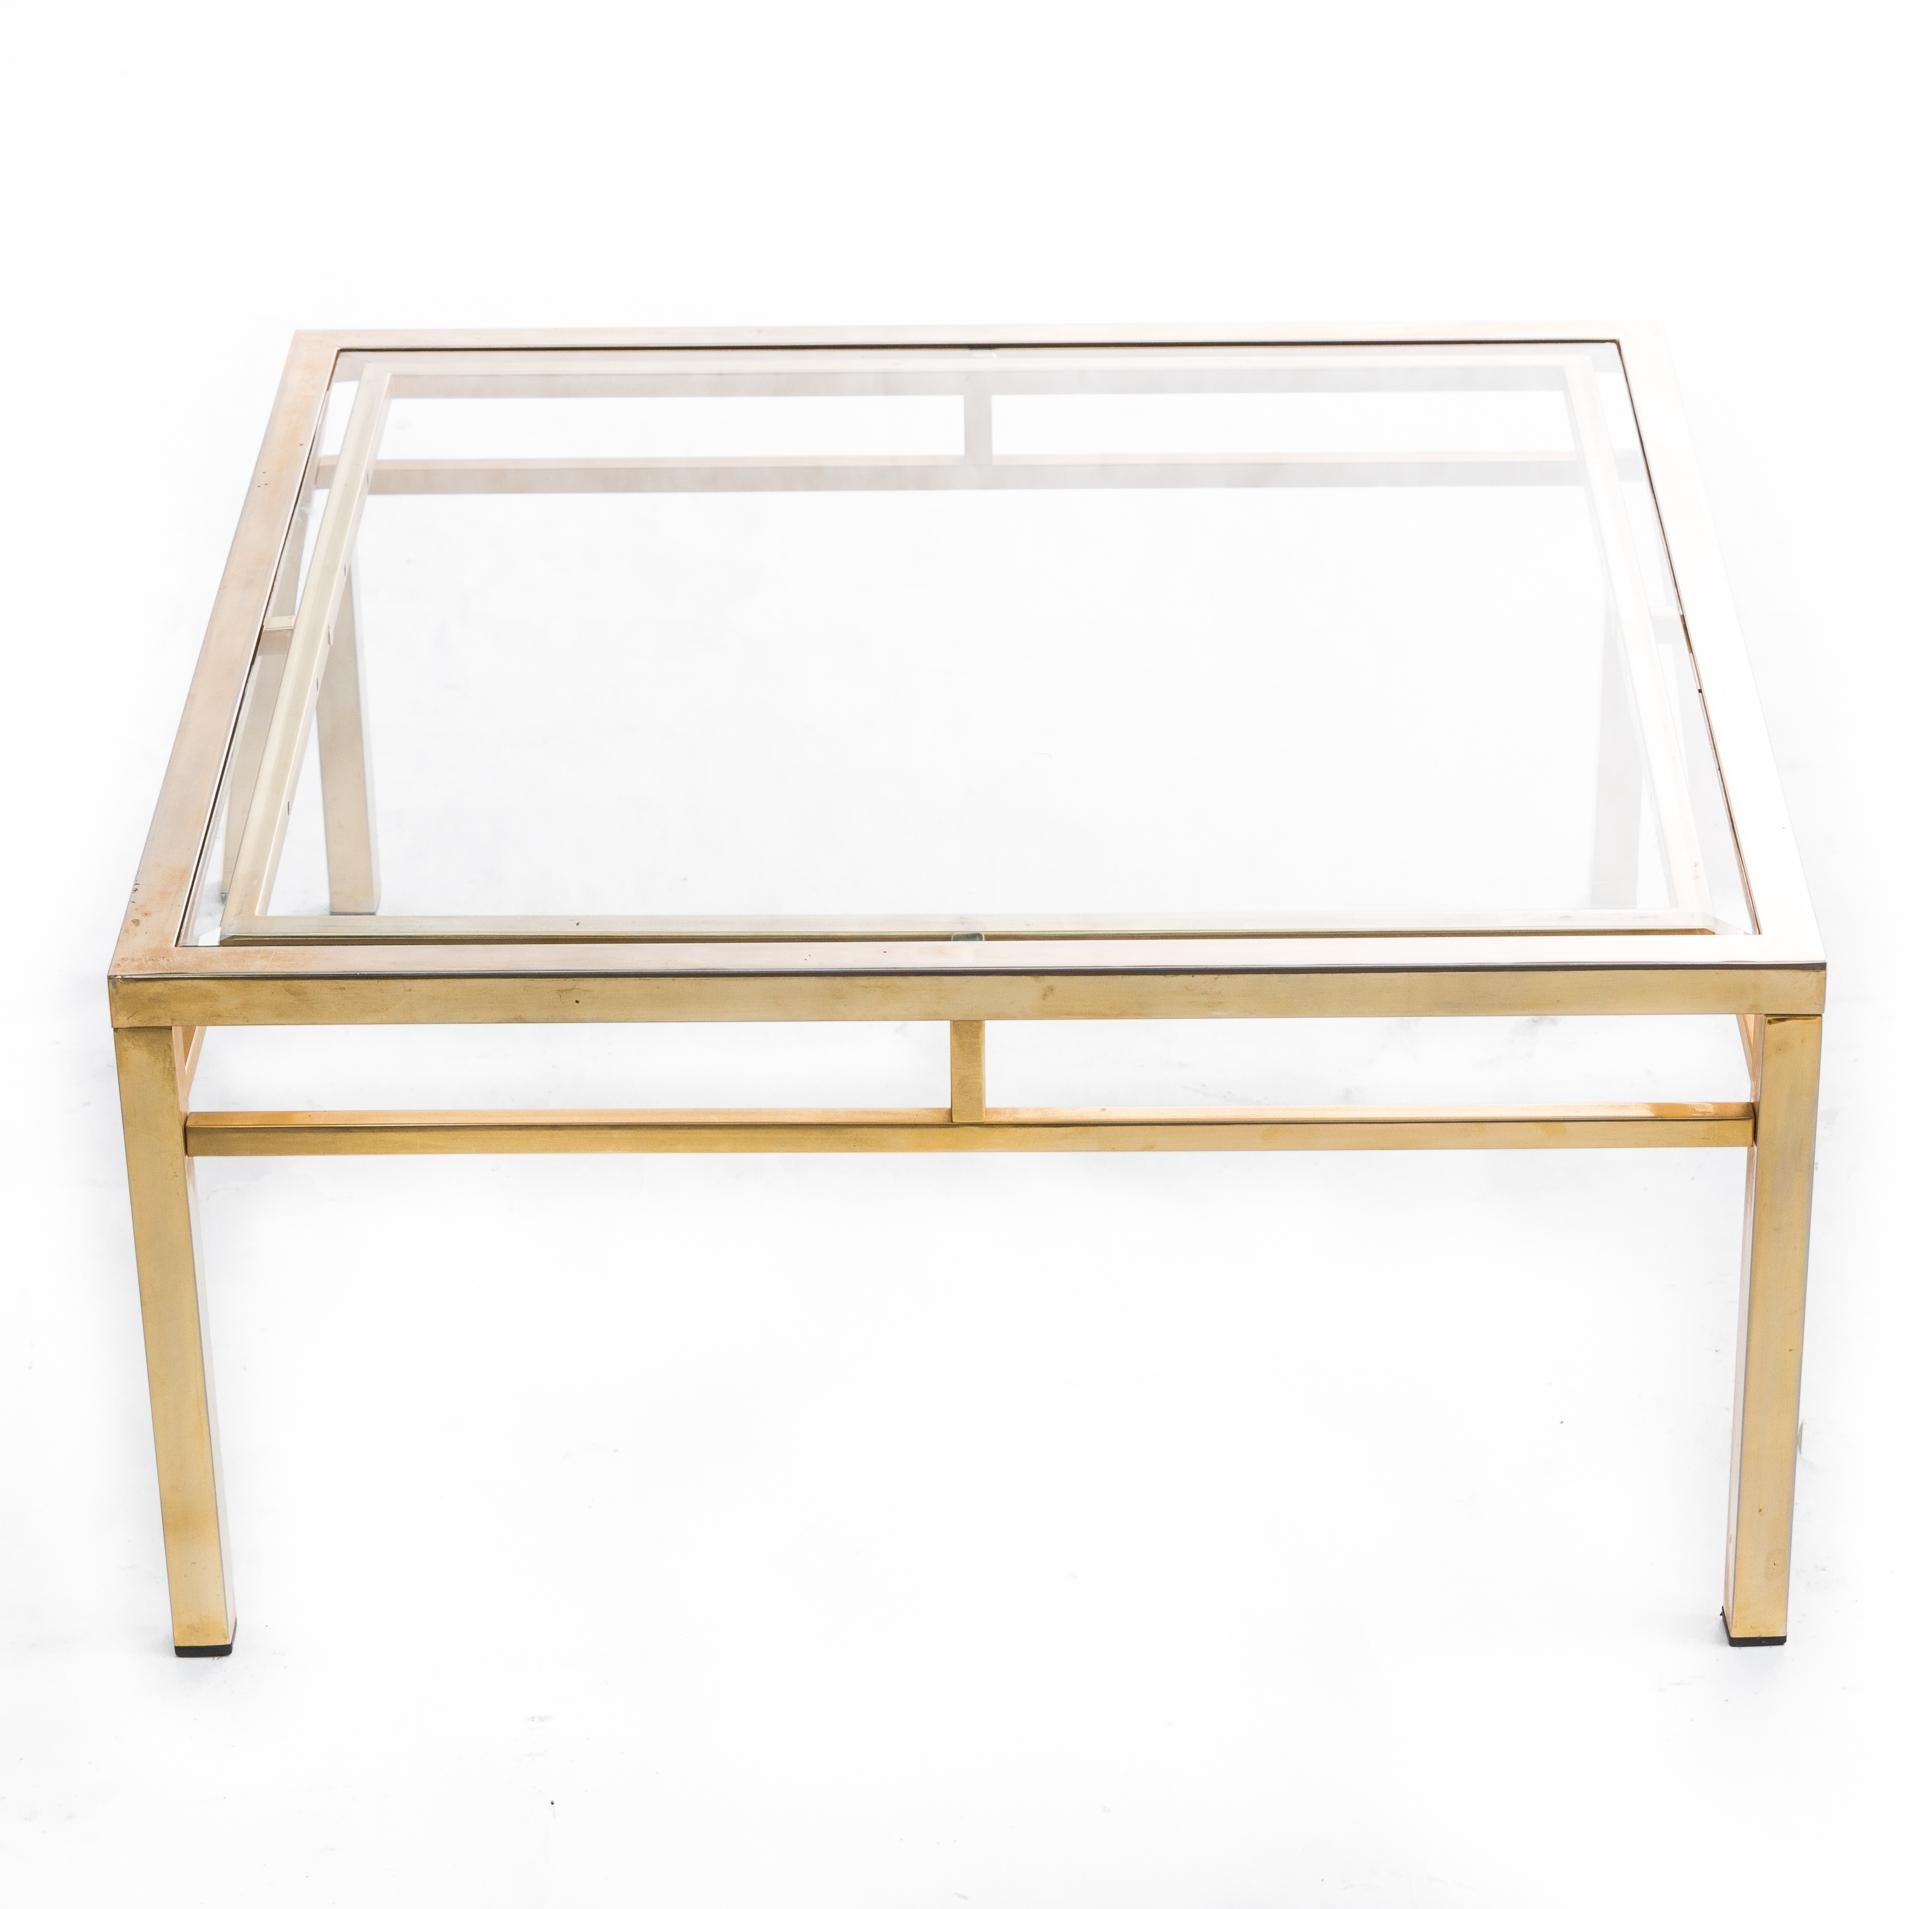 A transparent table made of polished brass and glass. A simple, noble form is emphasized by the highest quality materials. Construction is made of solid brass profiles.